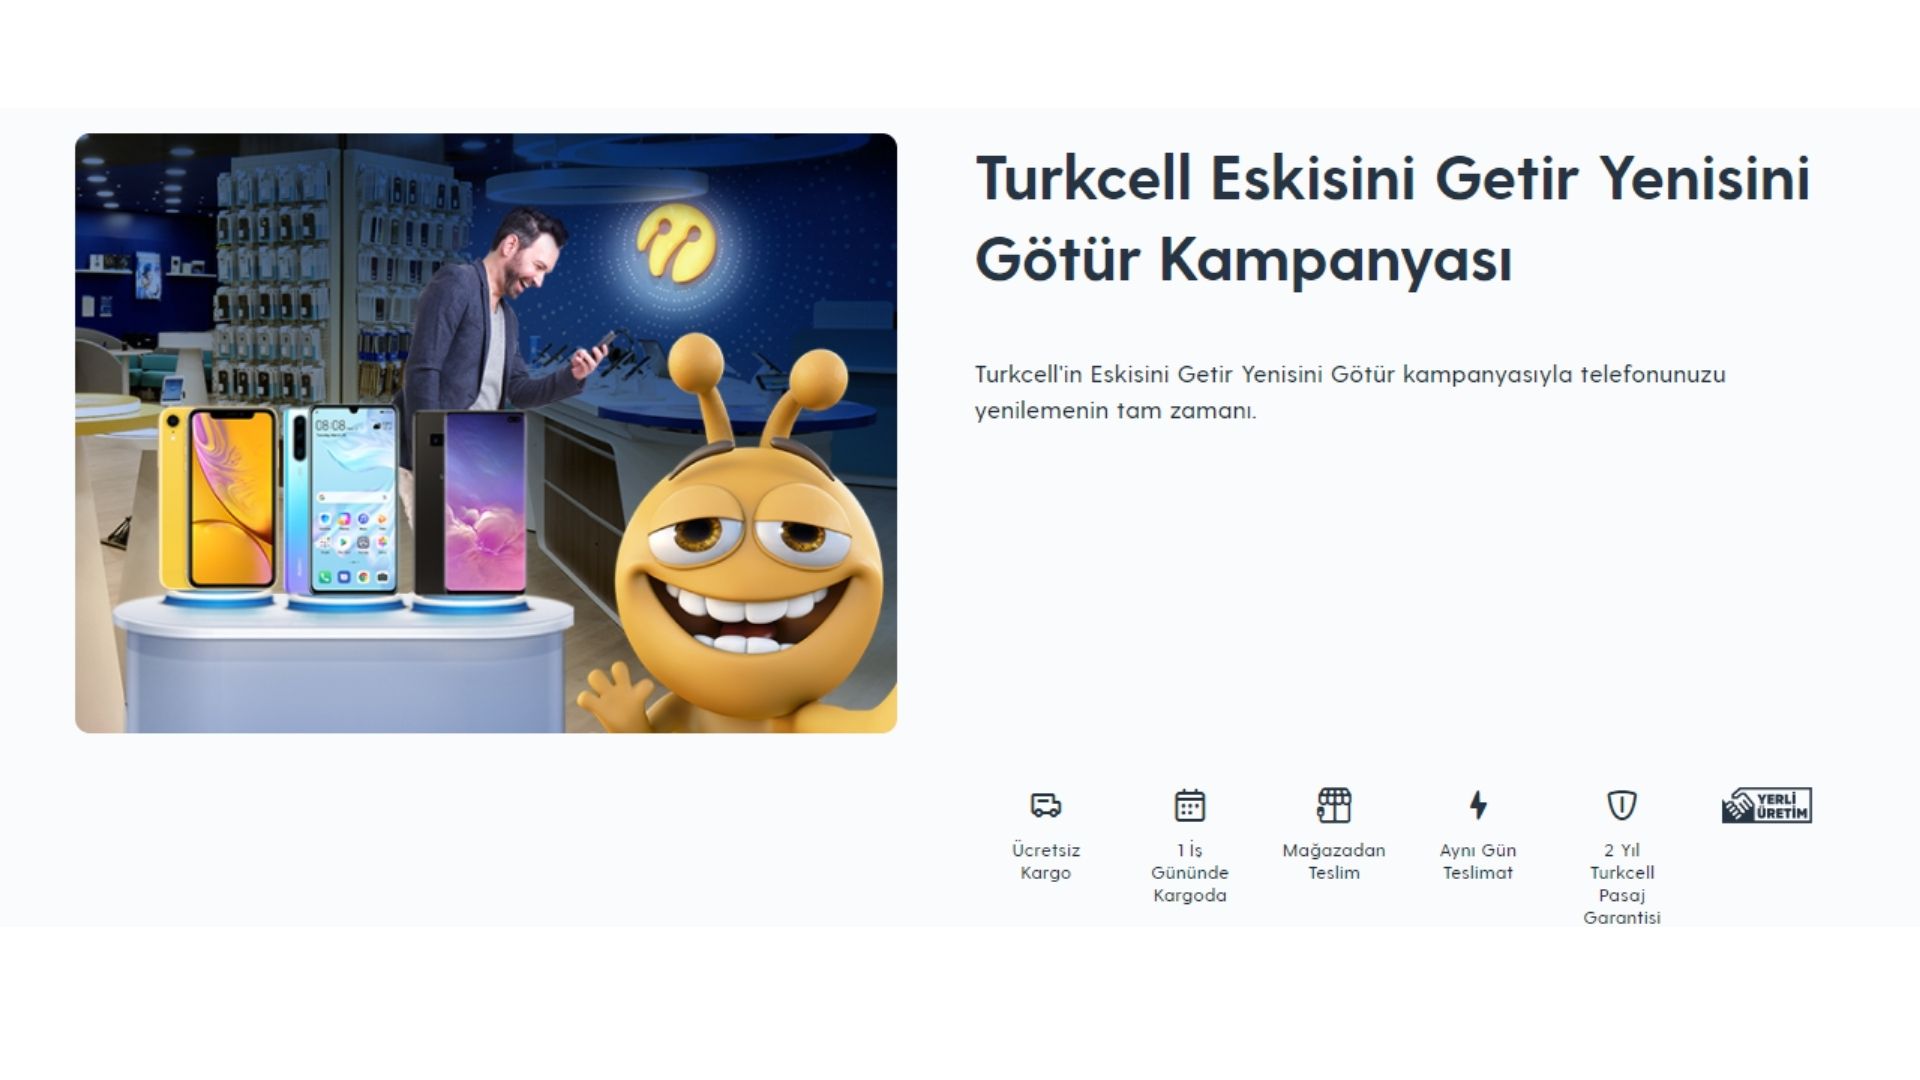 Turkcell bring the old take the new campaign